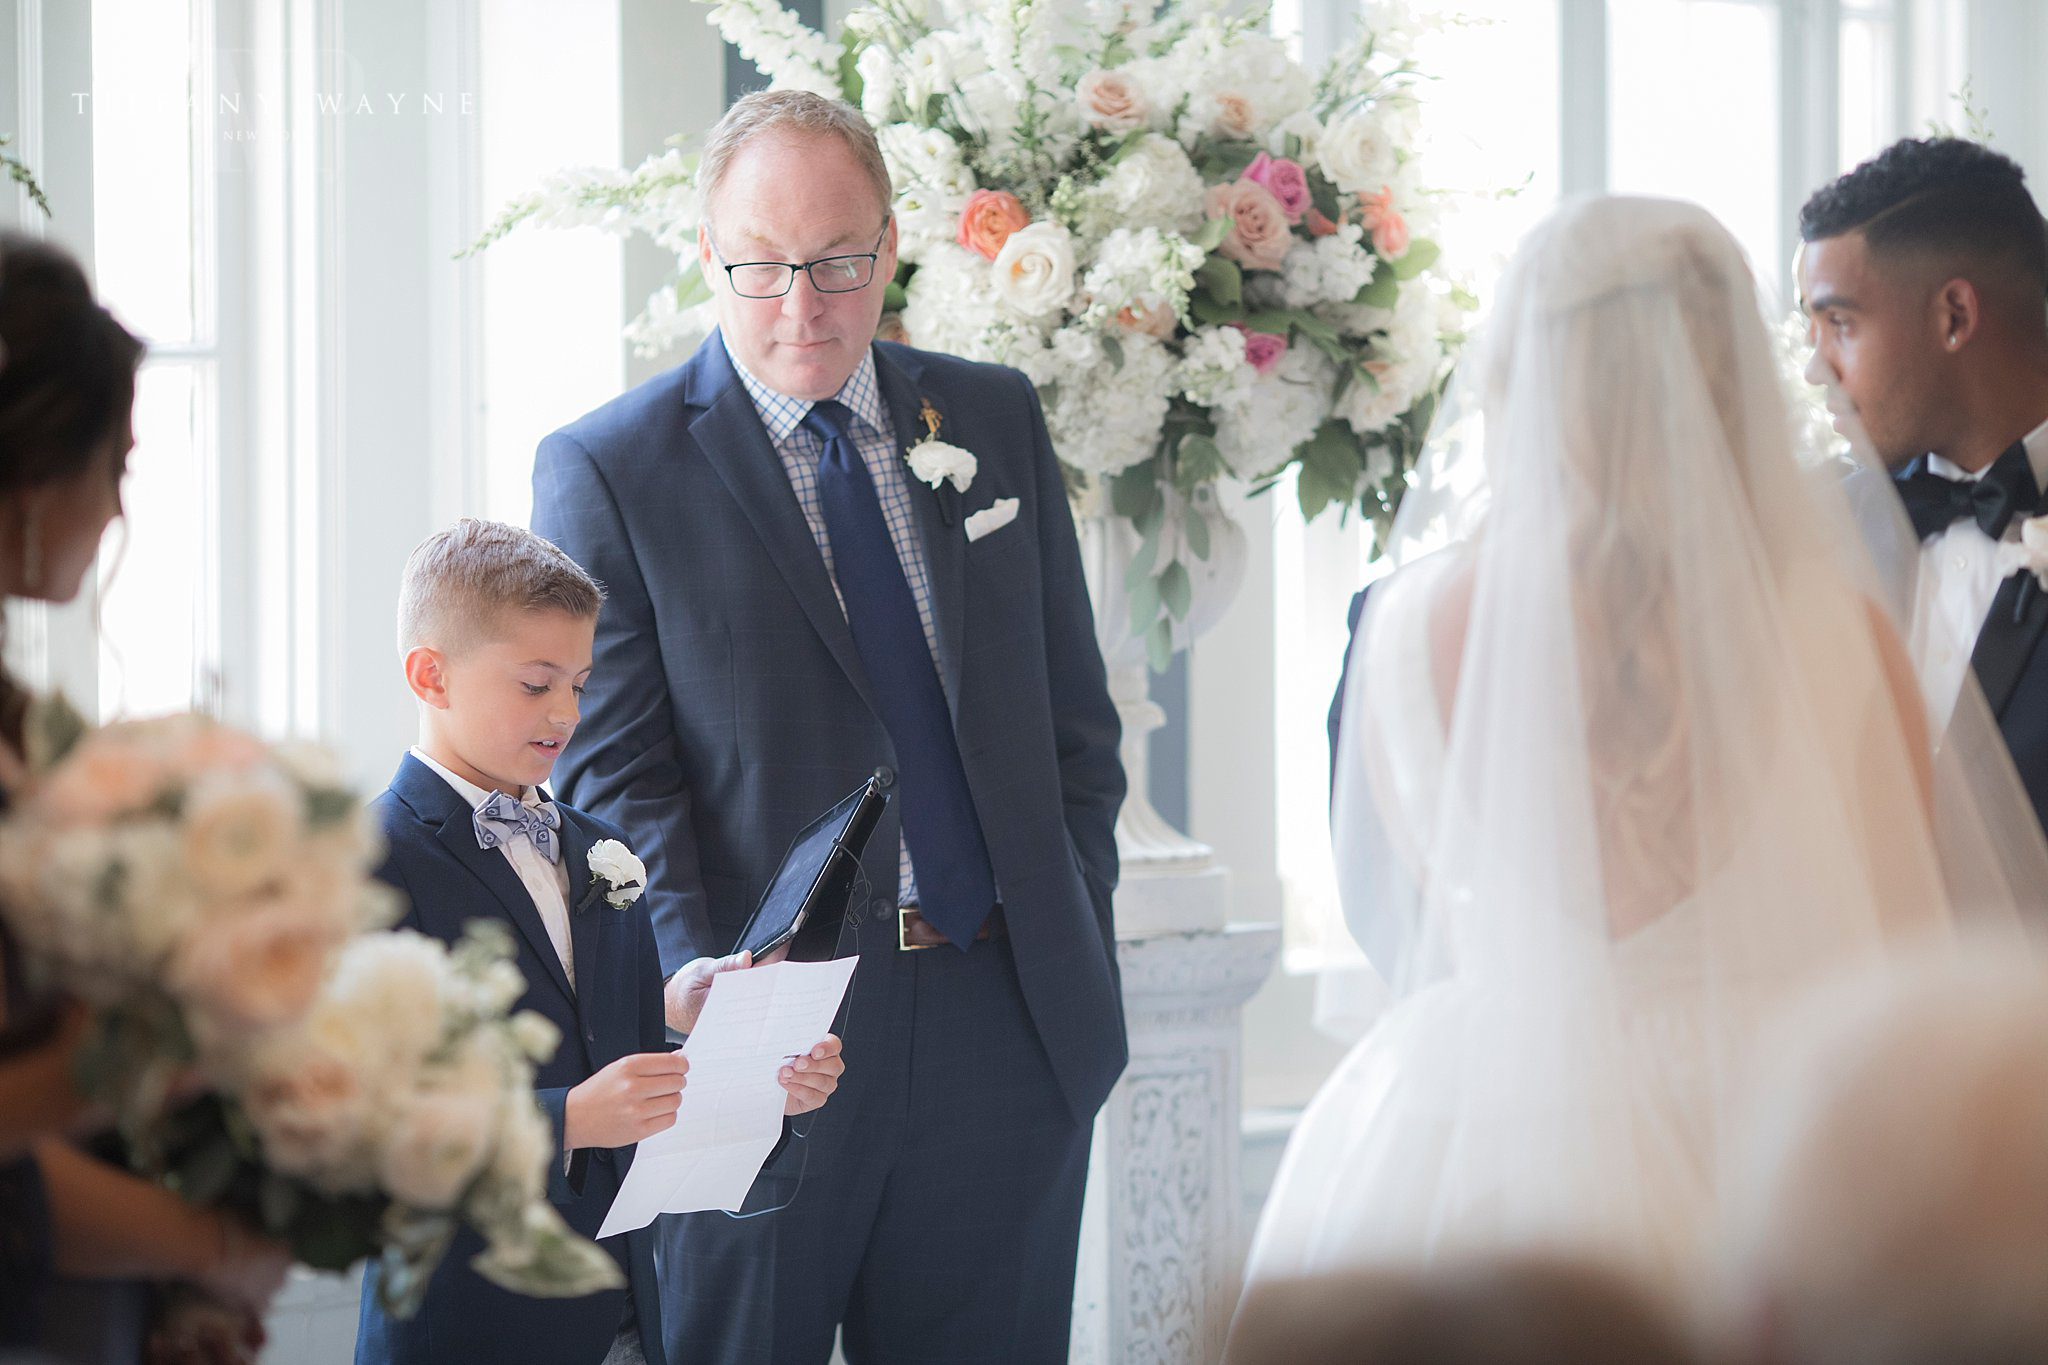 family member reads during NY wedding ceremony photographed by Tiffany Wayne Photography